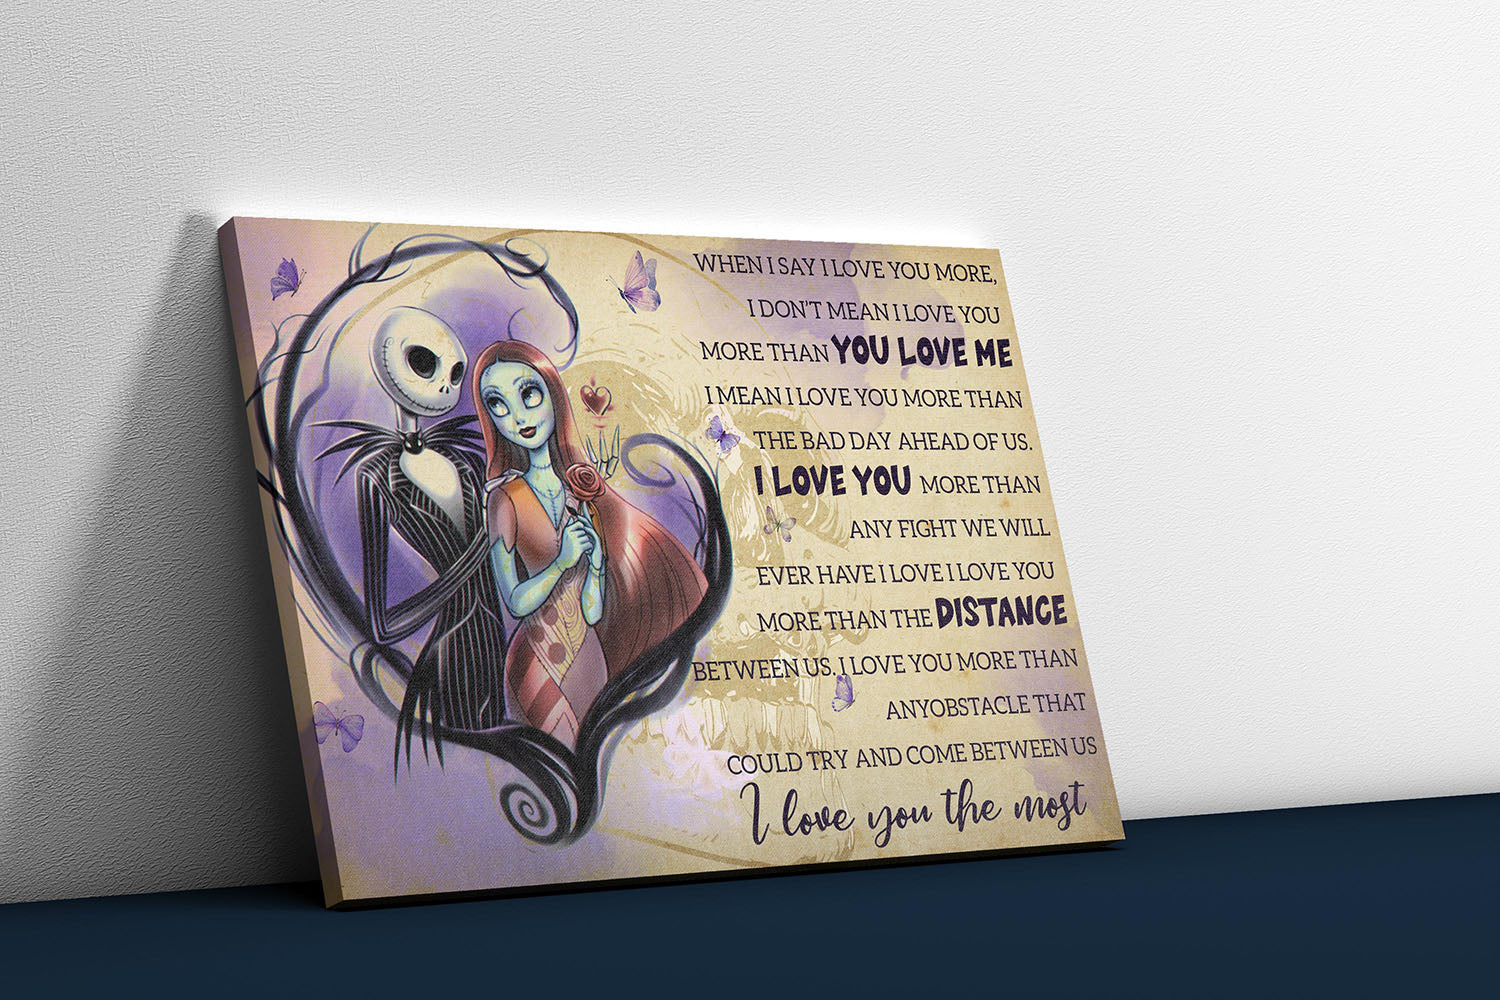 Couple Skellington When I Say I Love You More Quotes Loves Halloween